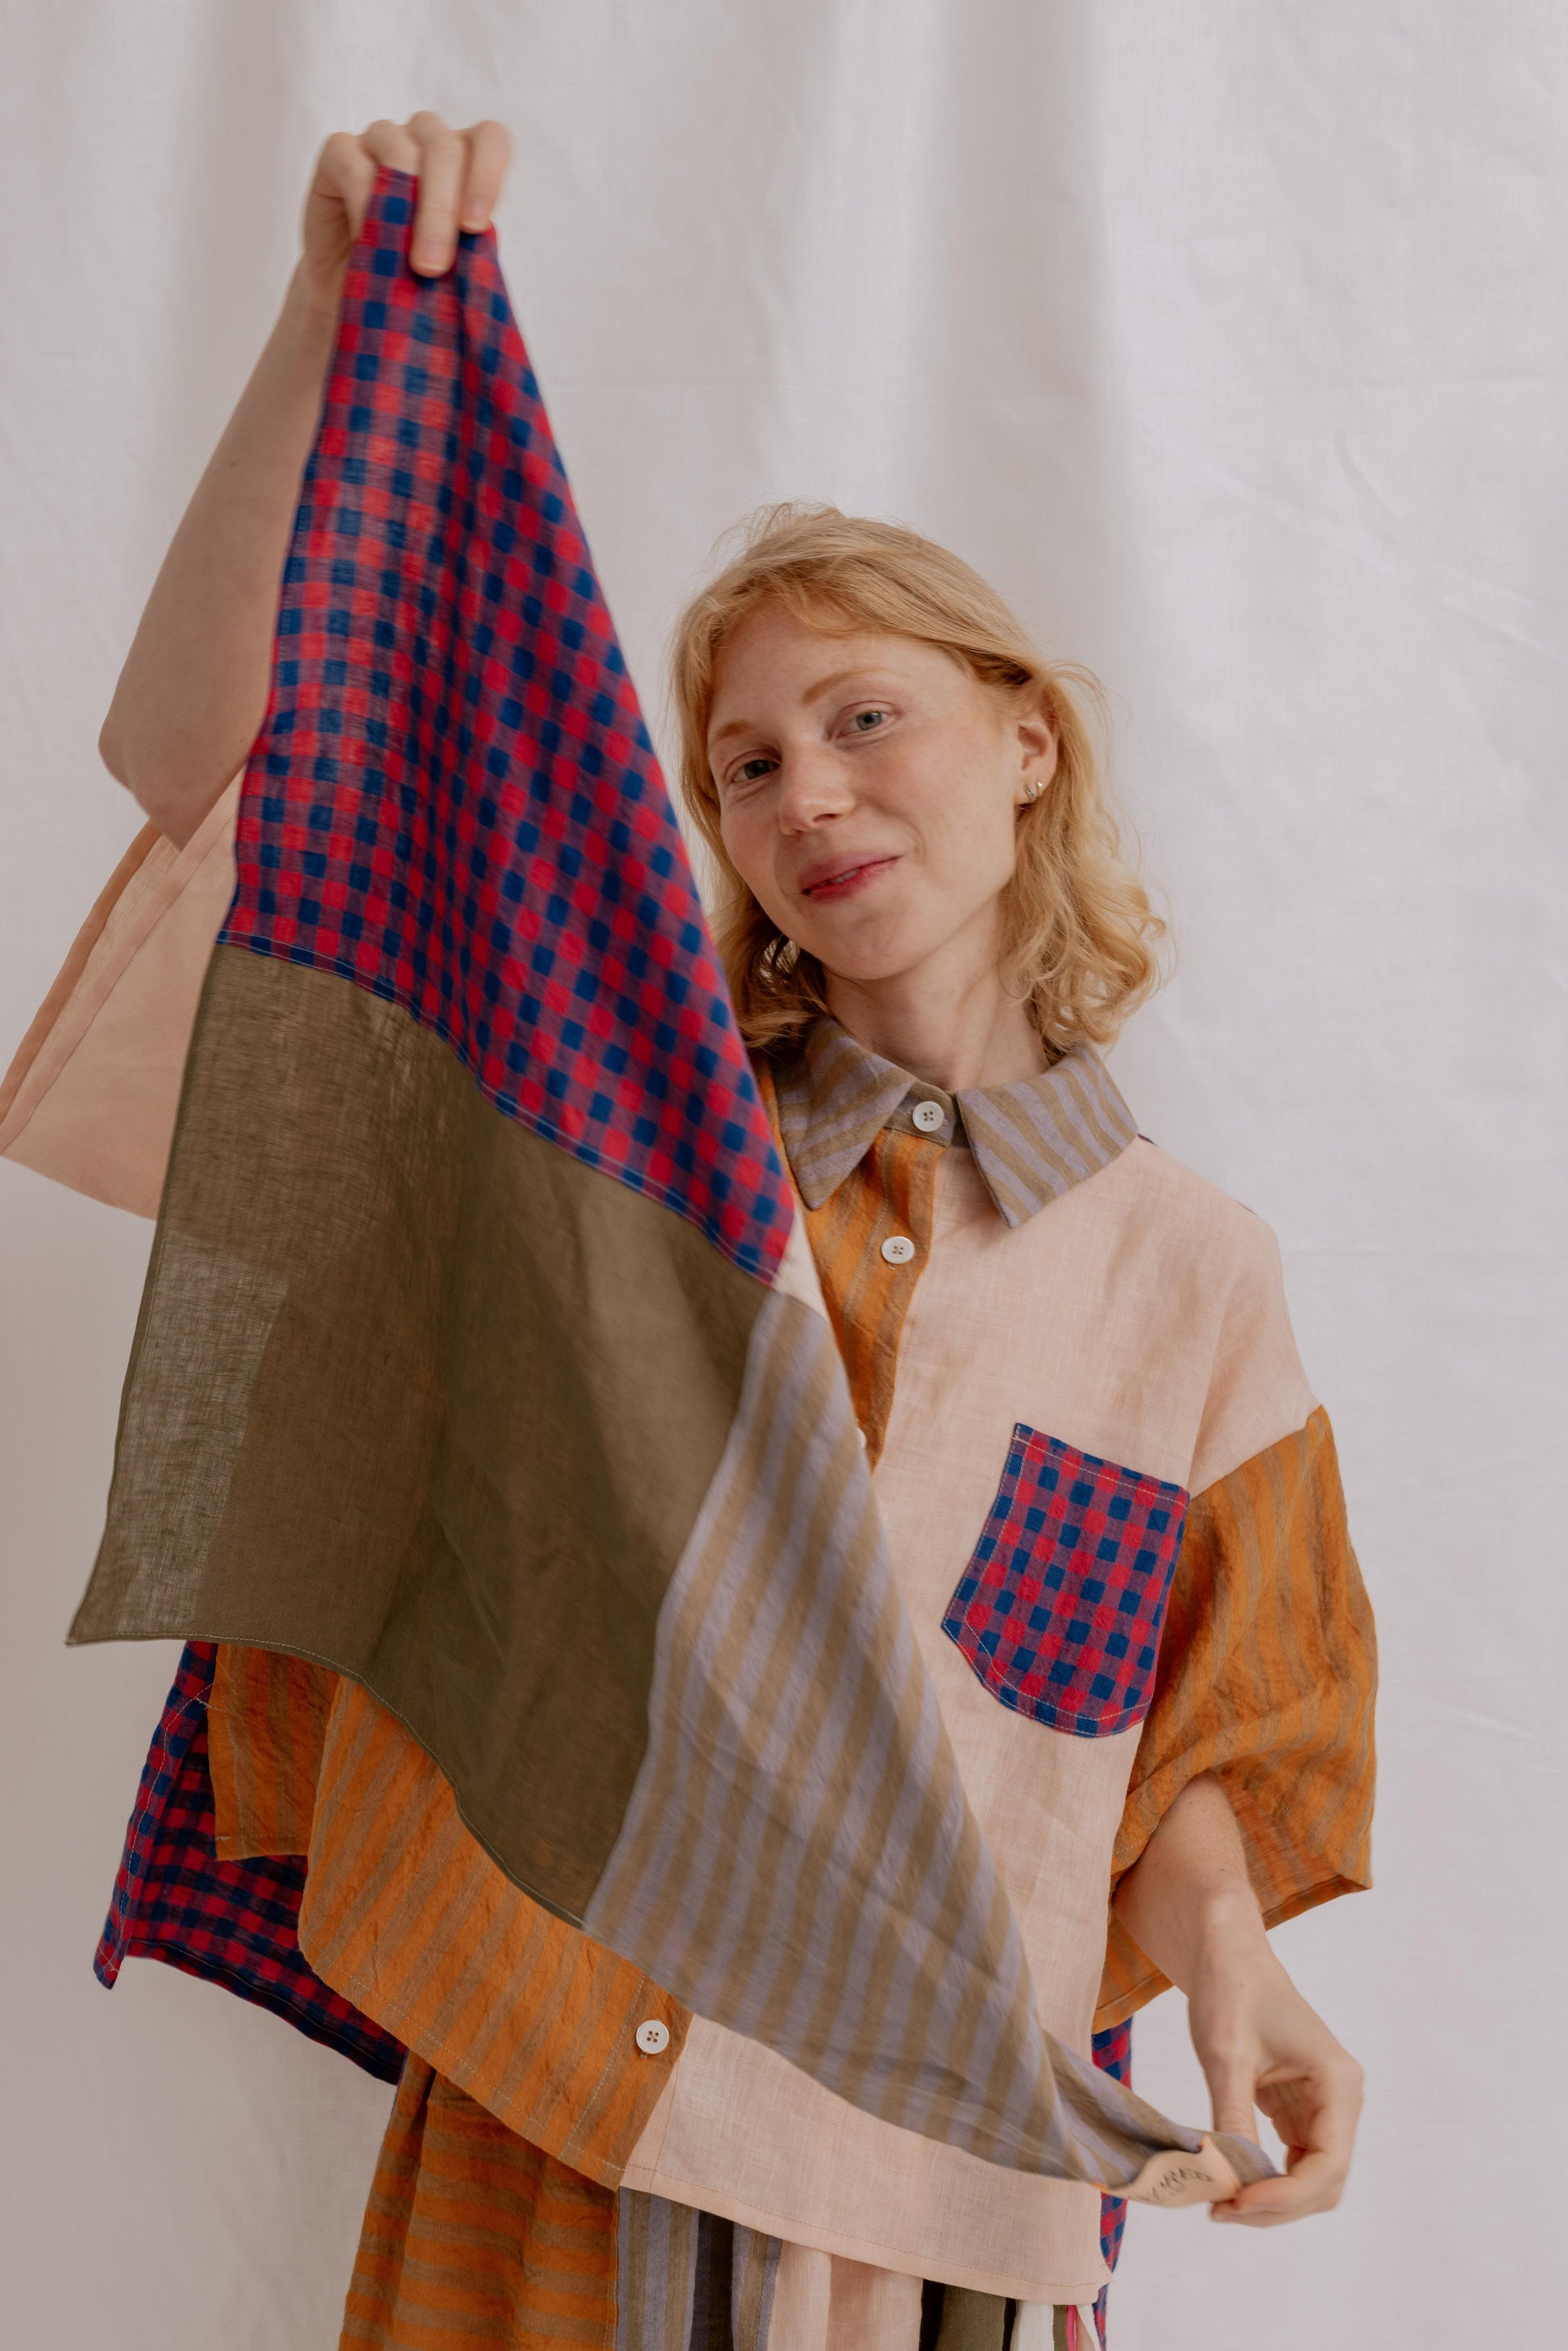 THE LINEN ROOM SCARF | This season we have introduced a new concept called The Linen Room Project Born out of our commitment to sustainability, we decided to rethink our design process and get creative with what we already have in 'The Linen Room'. Using